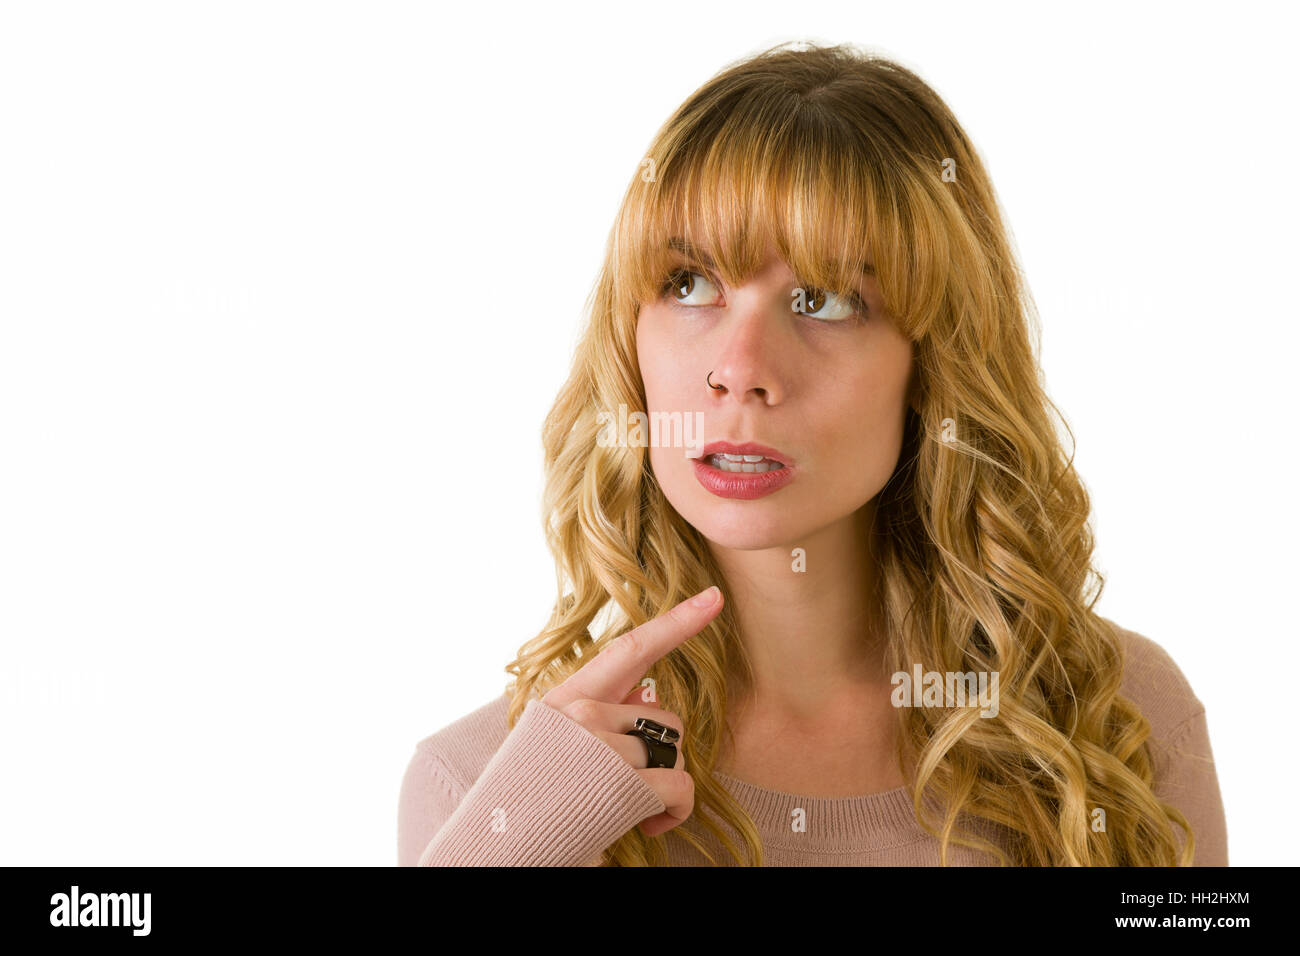 An attractive blonde woman pondering. copyspace for text. Stock Photo